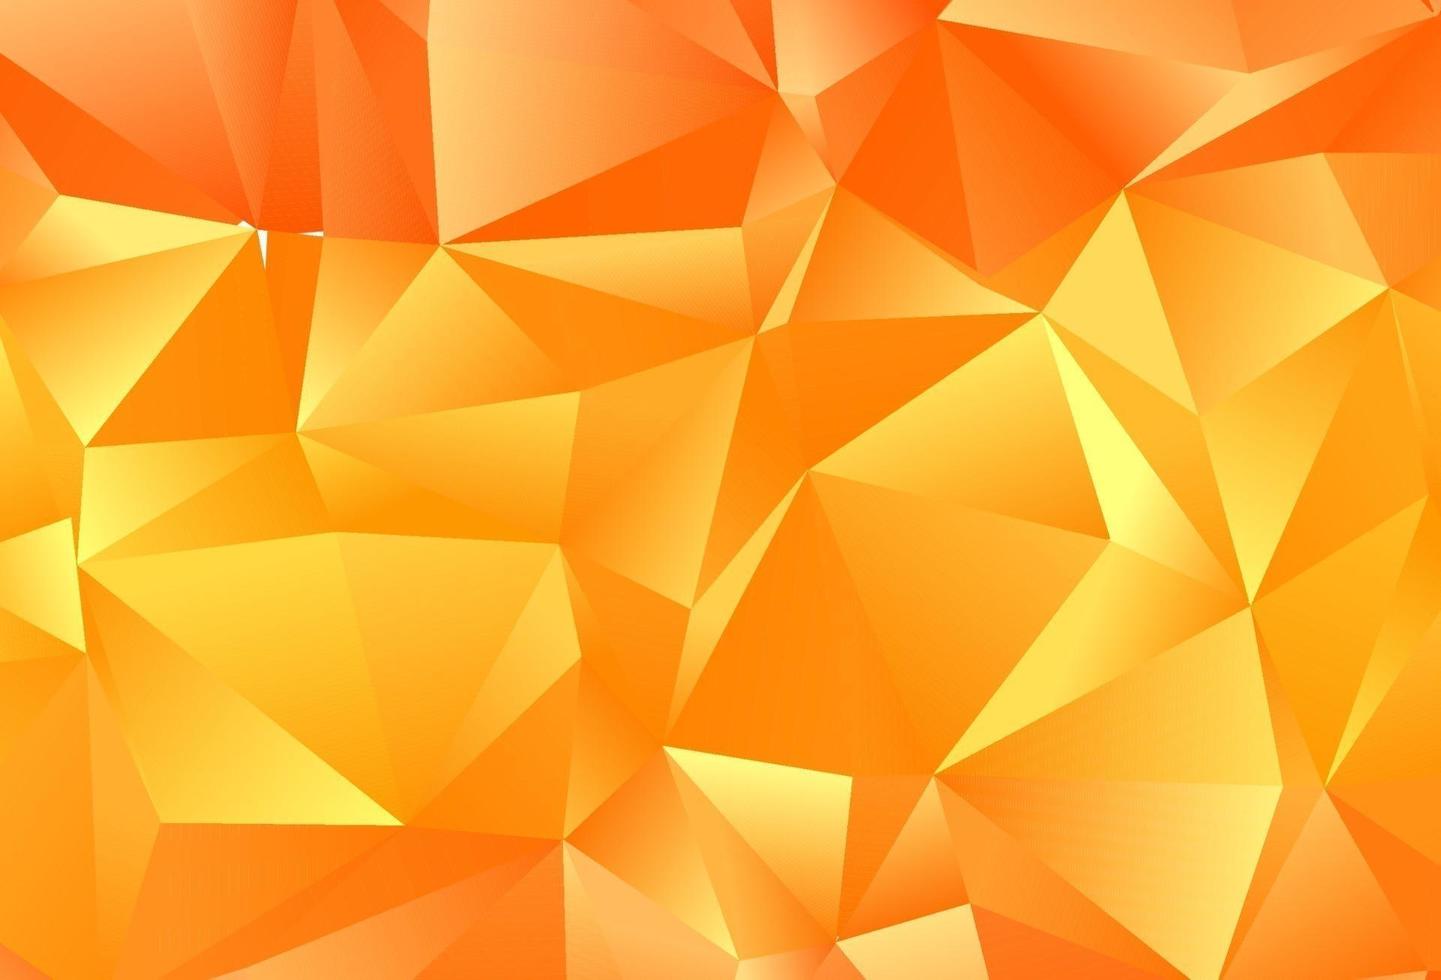 Light Orange vector low poly layout.